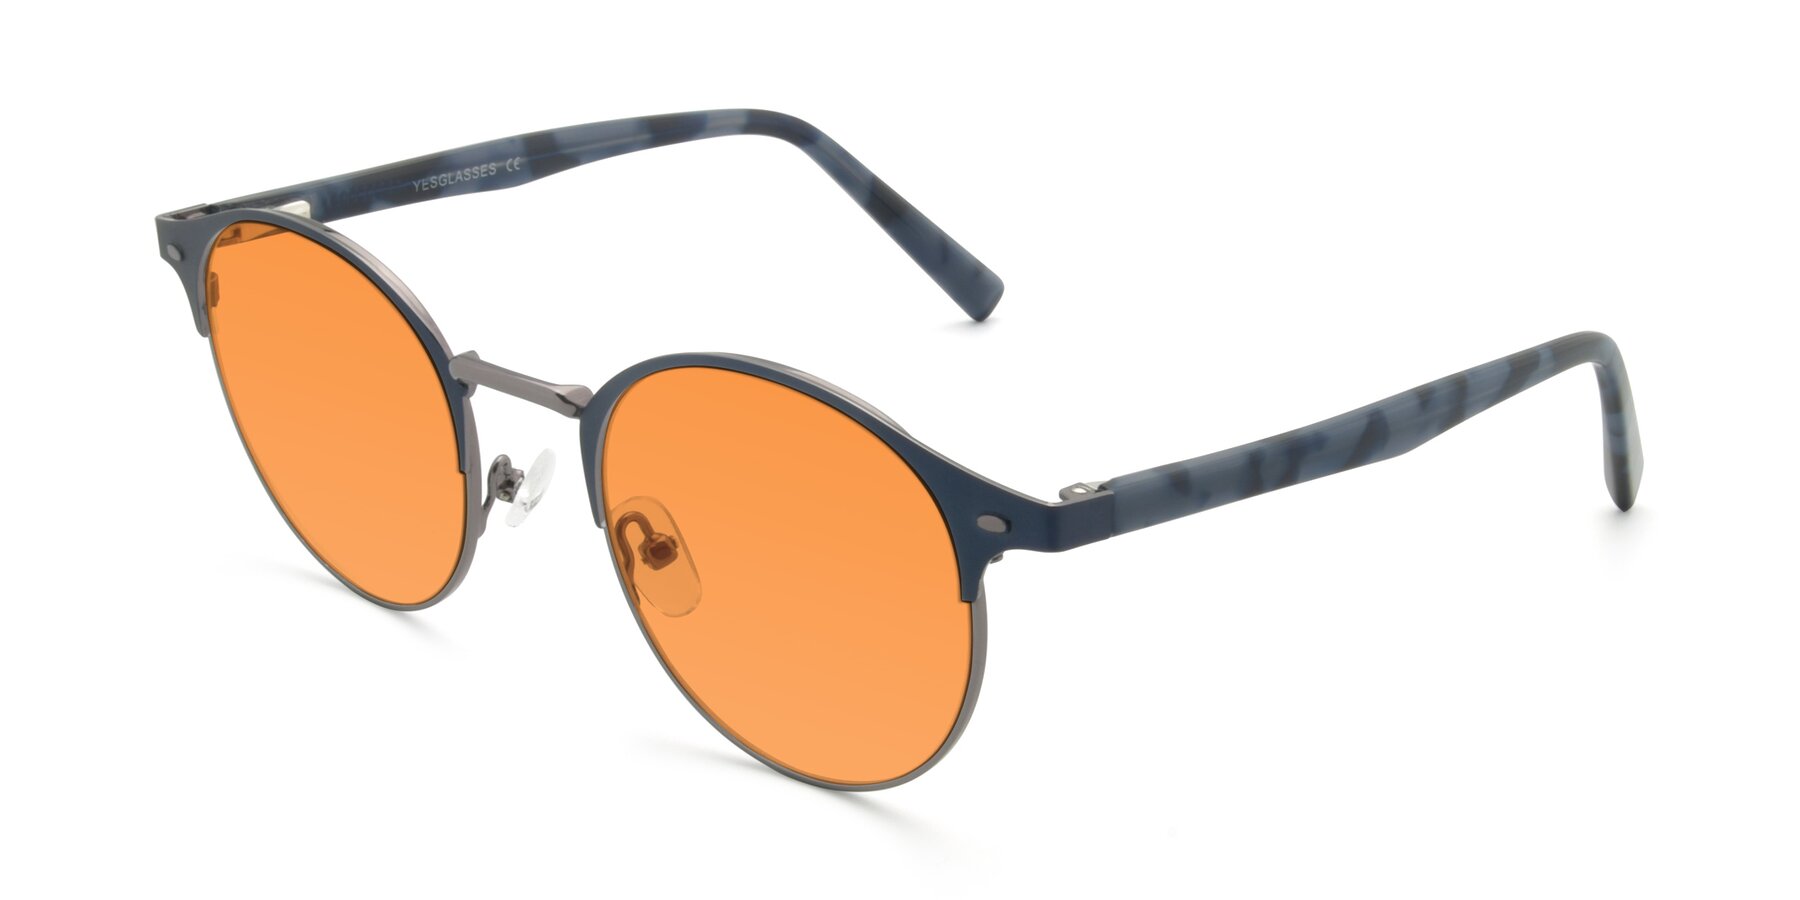 Angle of 9099 in Blue-Gunmetal with Orange Tinted Lenses